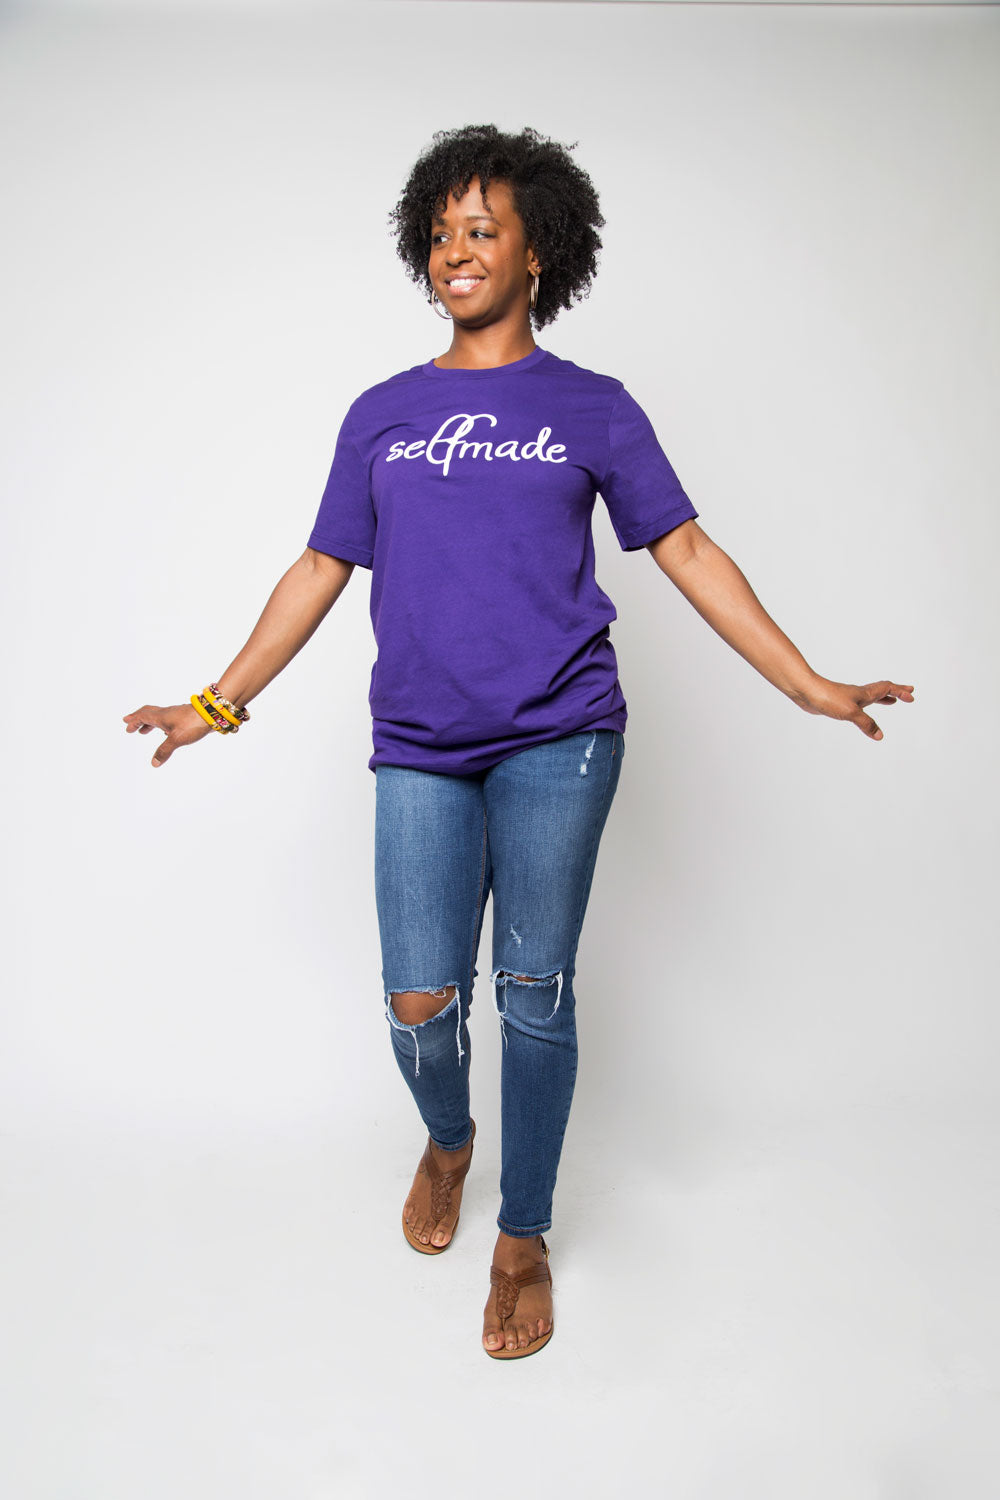 Selfmade Shirt in Purple - Trunk Series